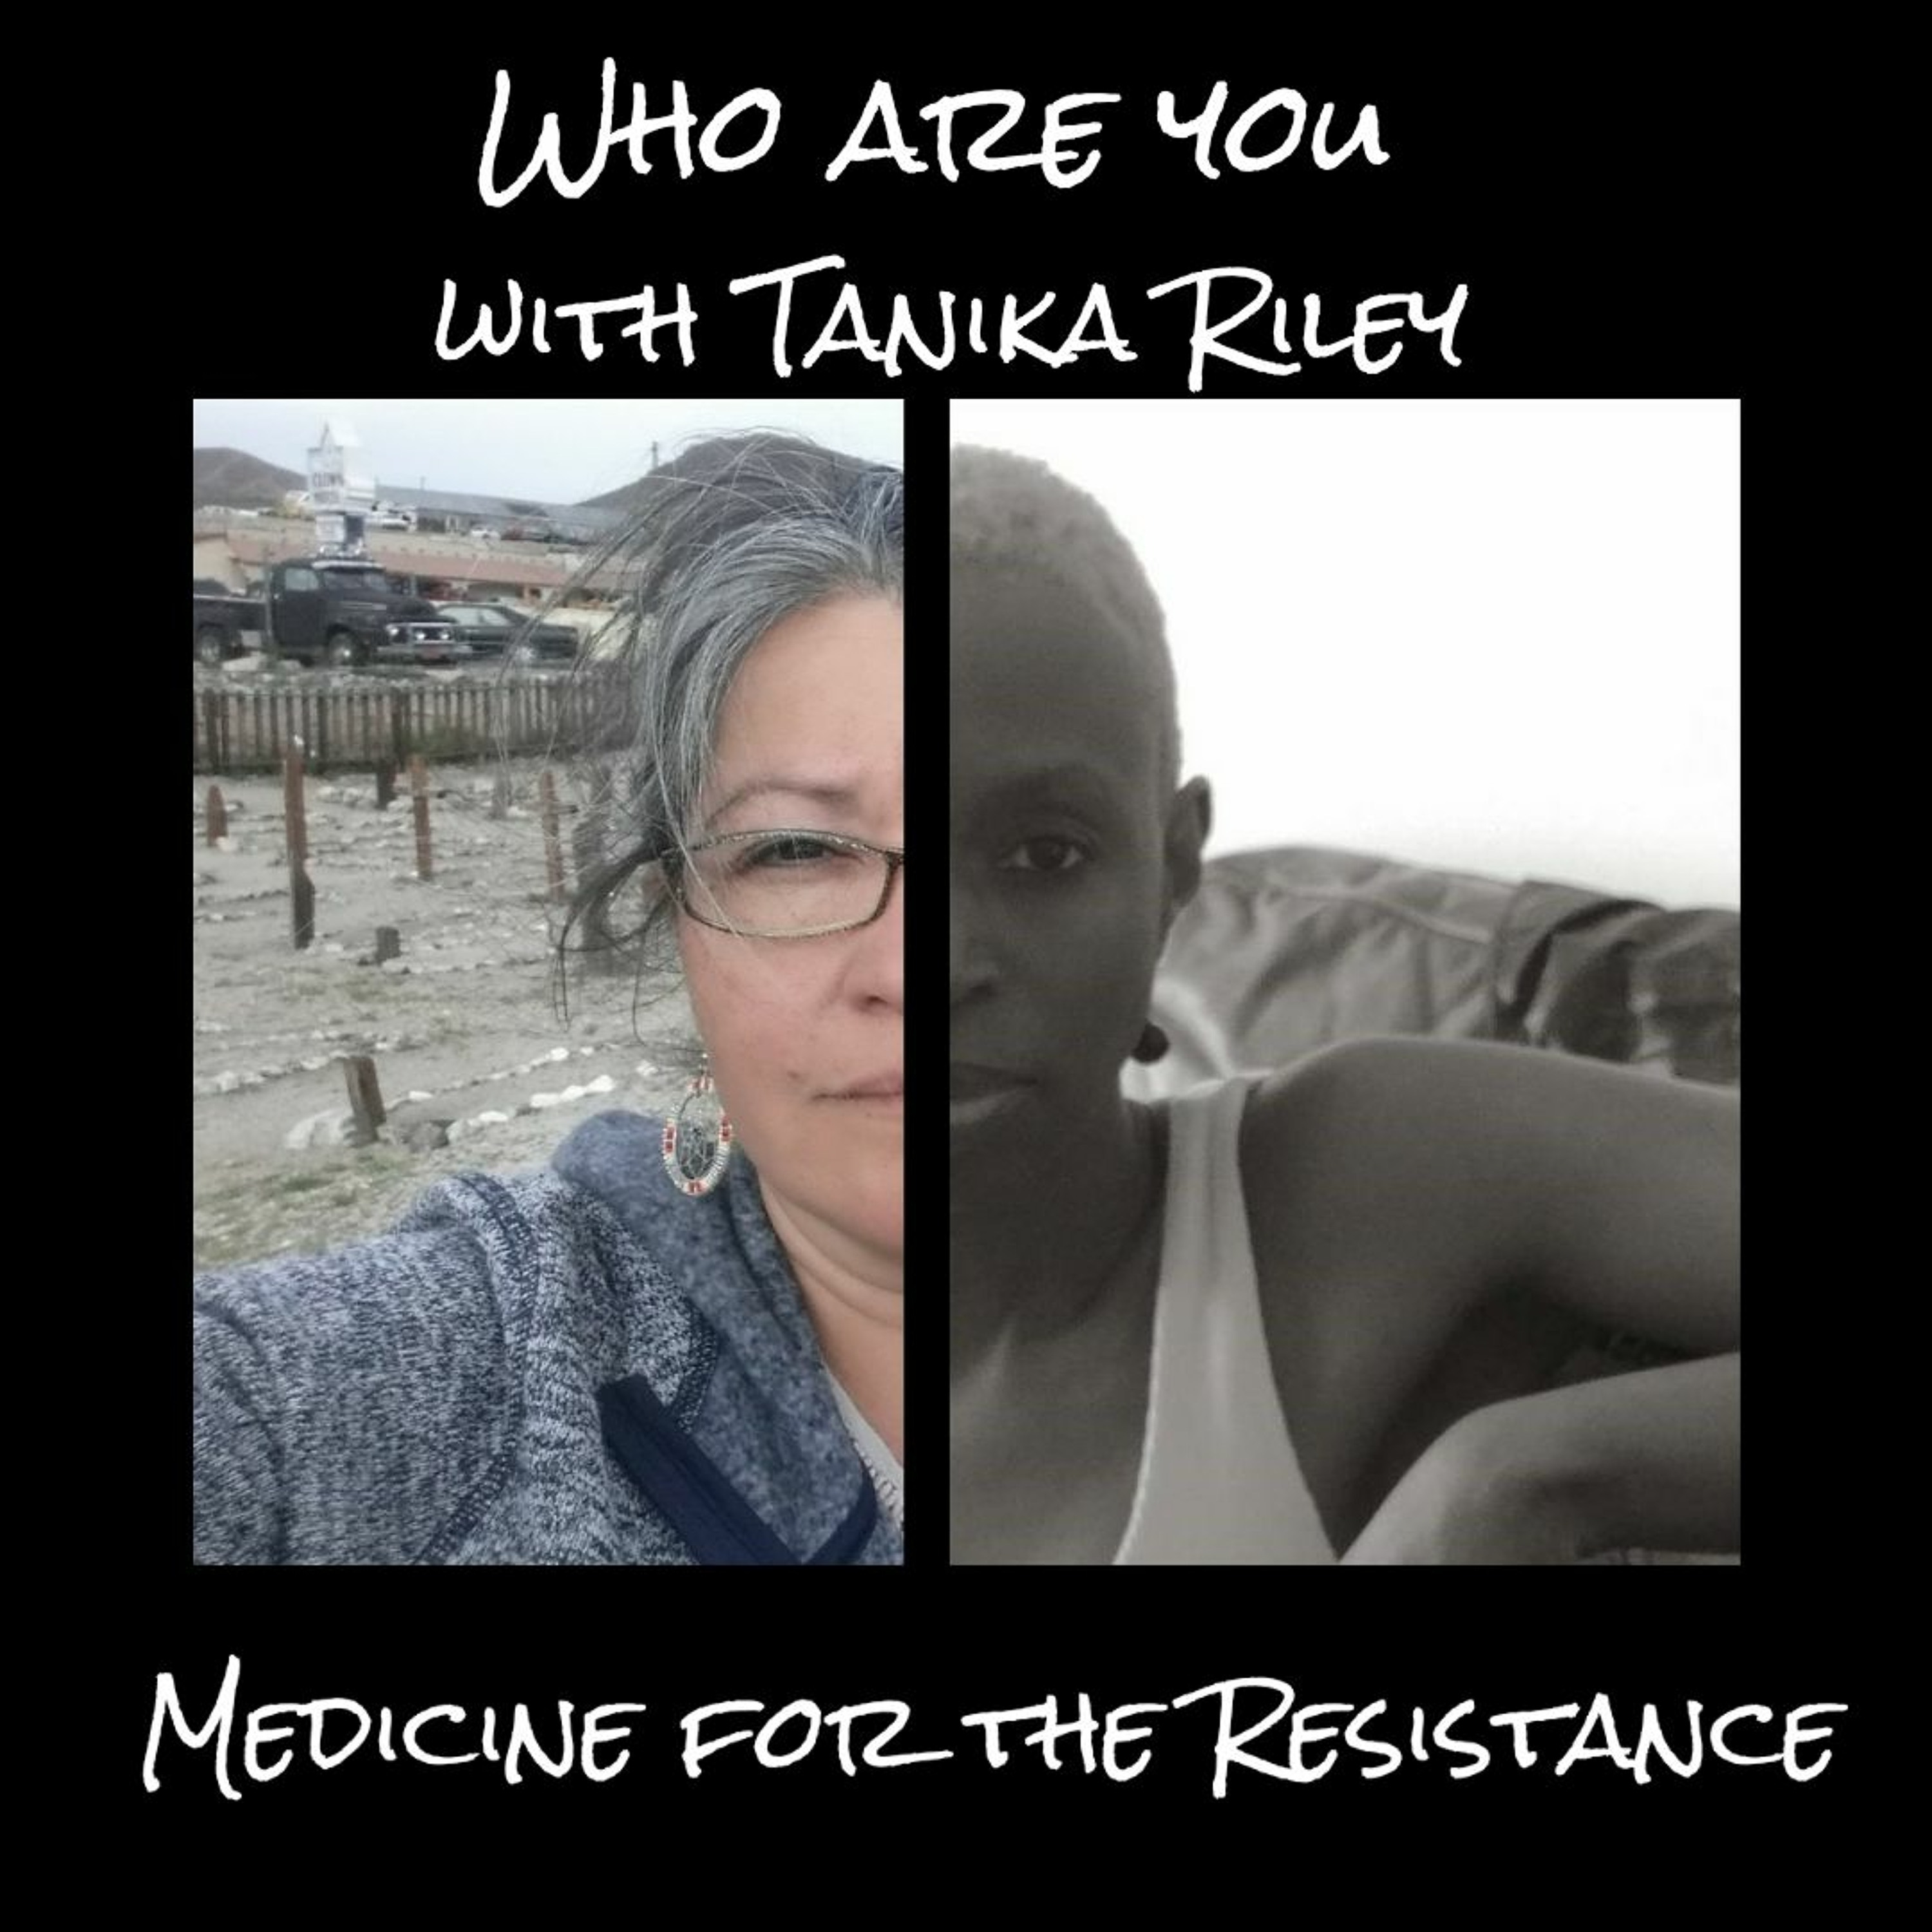 Who are you? with Tanika Riley